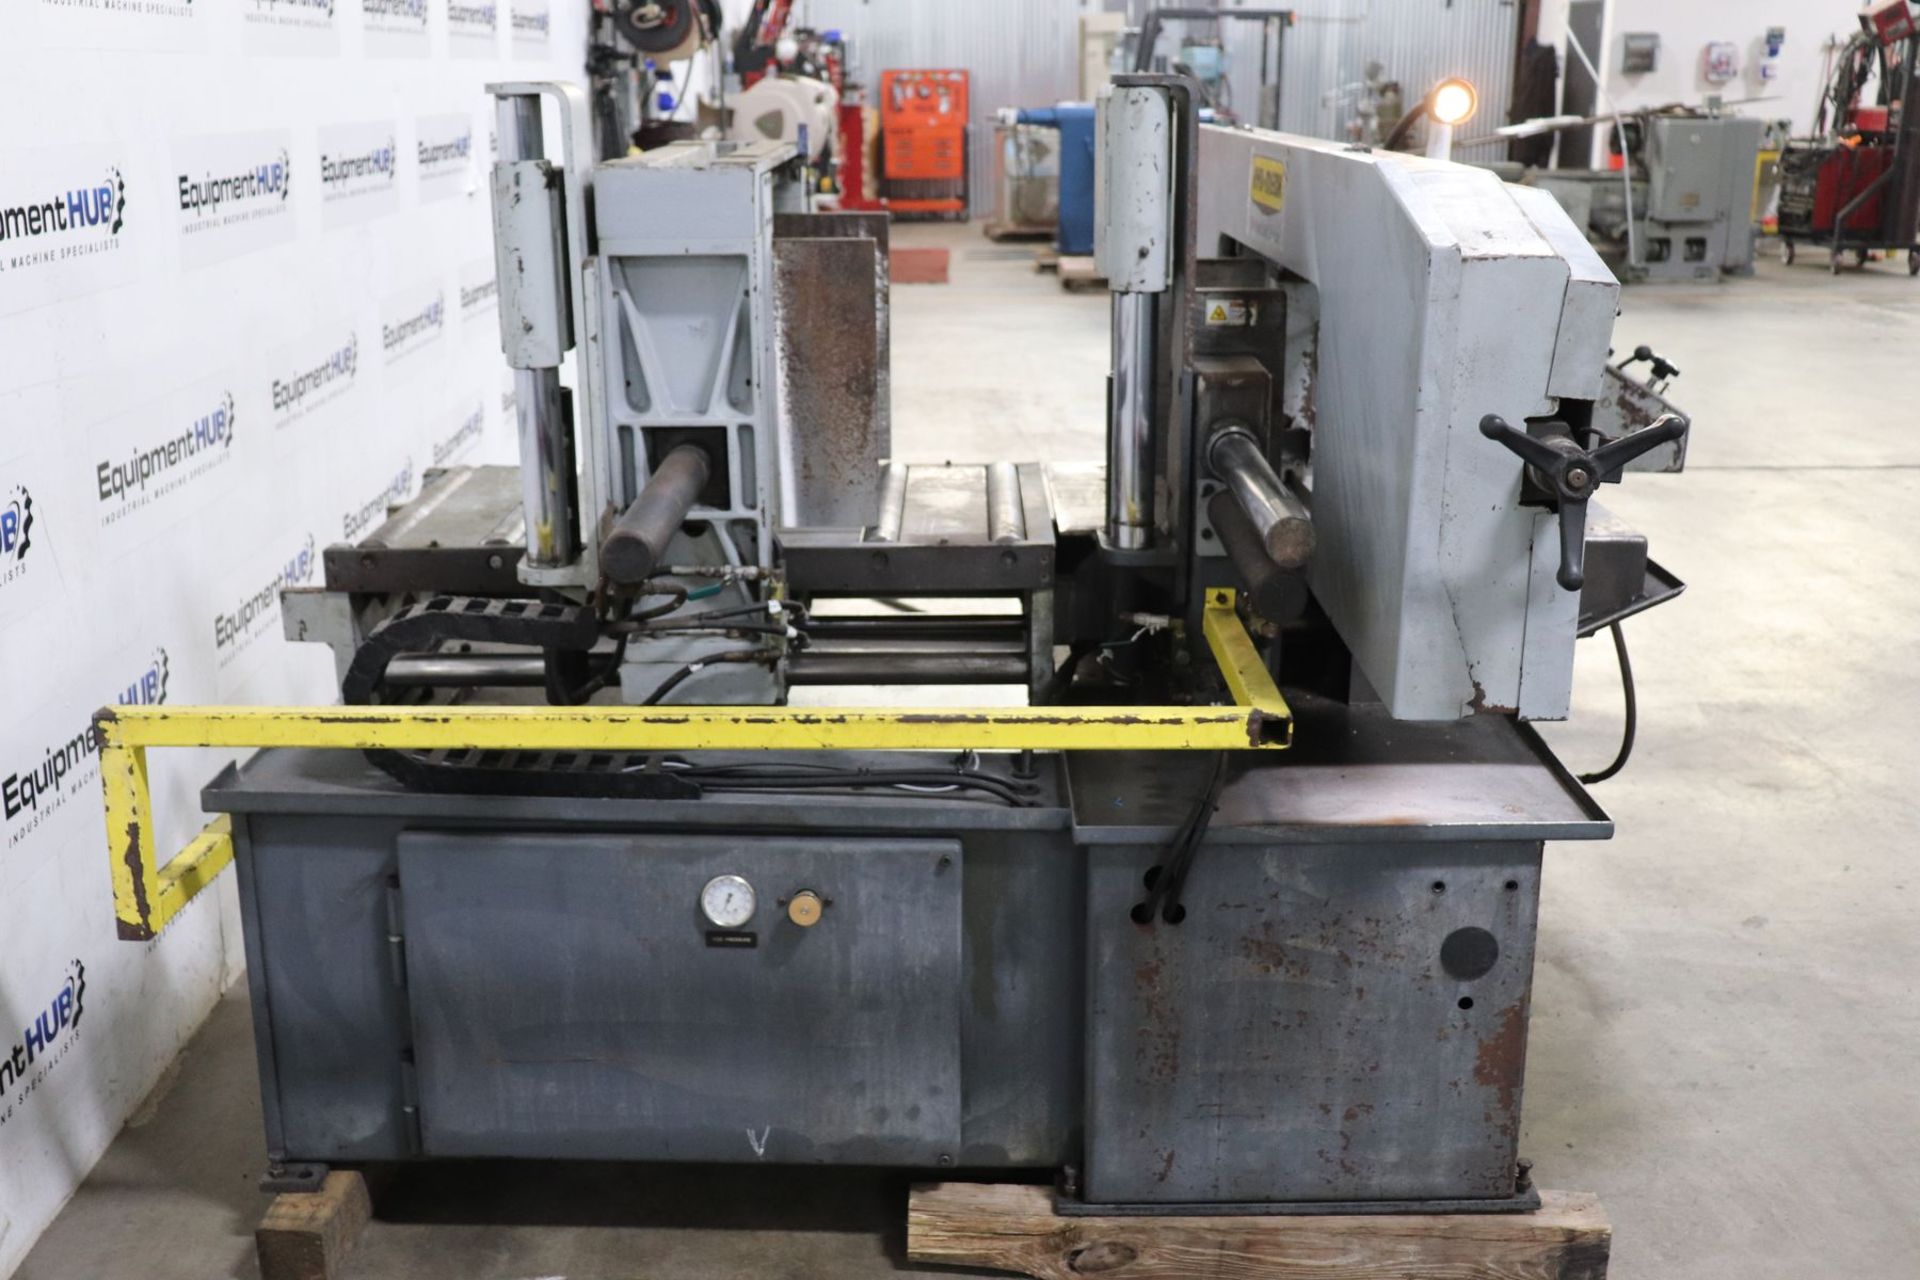 Hyd-Mech S-20A 13" x 18" Automatic Horizontal Band Saw - Image 5 of 8